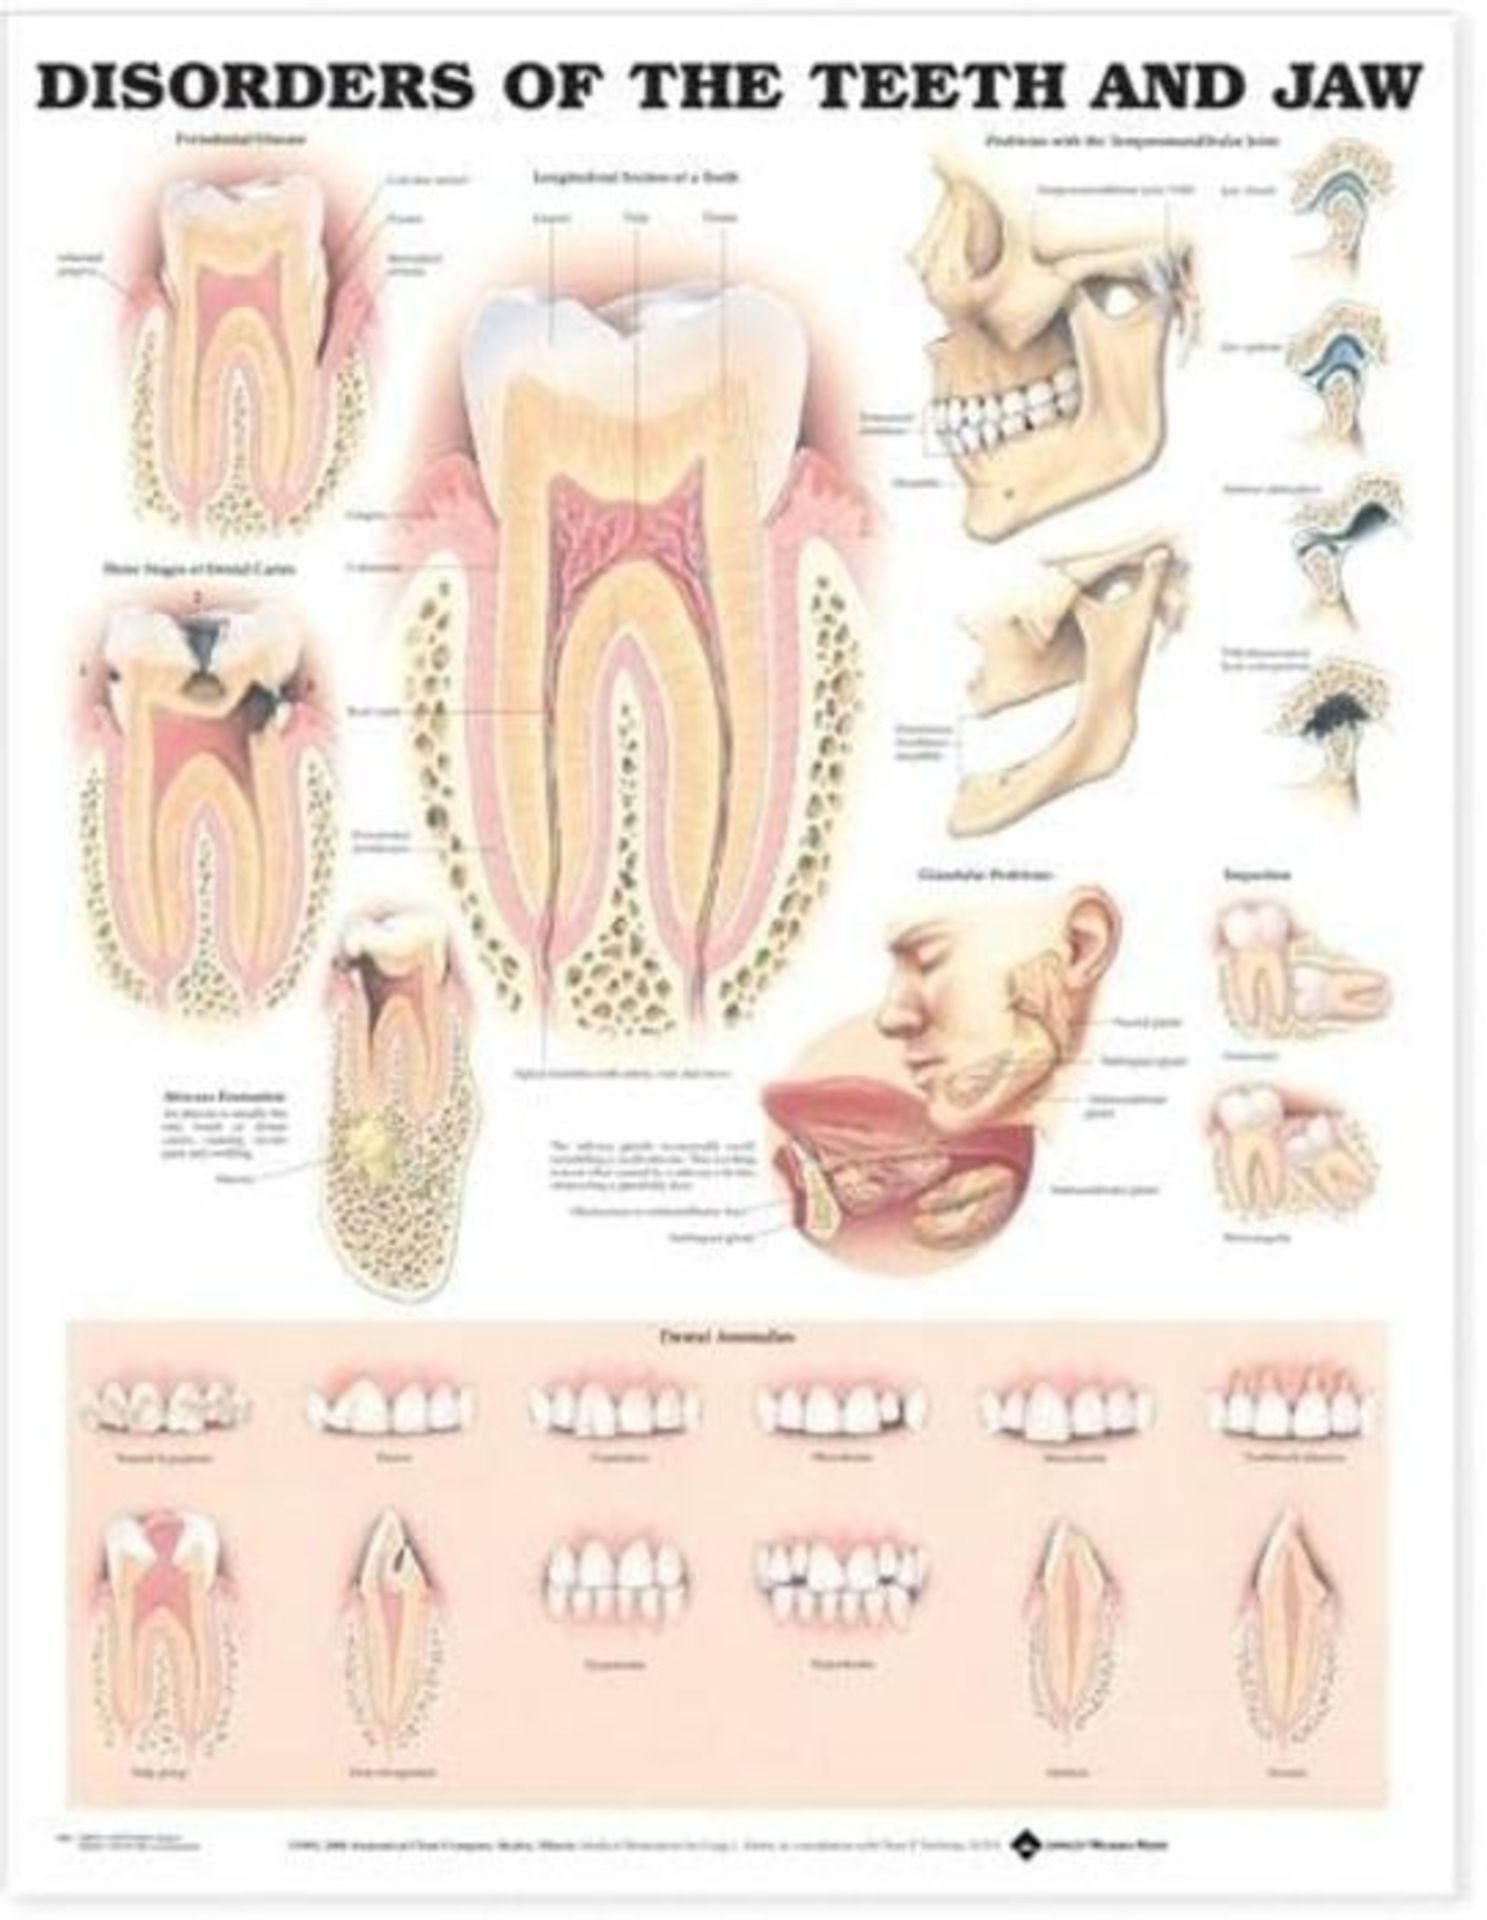 Disorders of the Teeth and Jaw